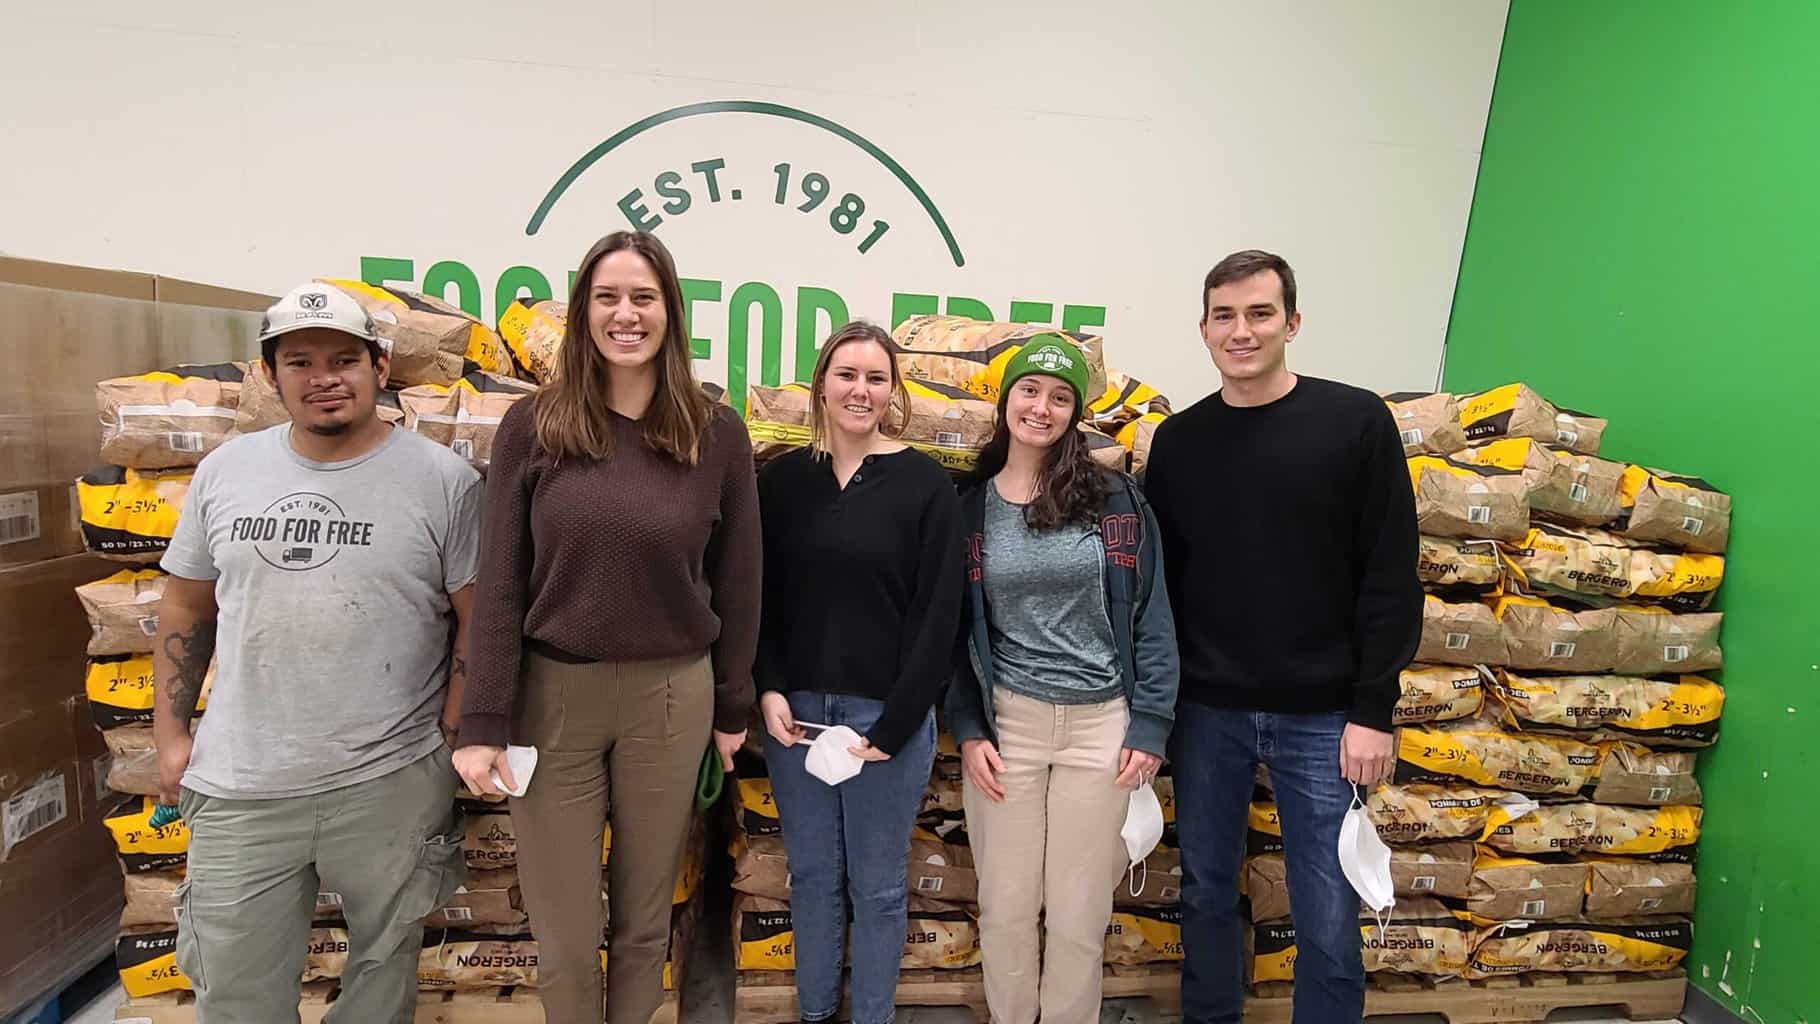 Photo of recently promoted staff members posing in front of stacks of potatoes, with Food For Free logo partially visible on the wall behind.